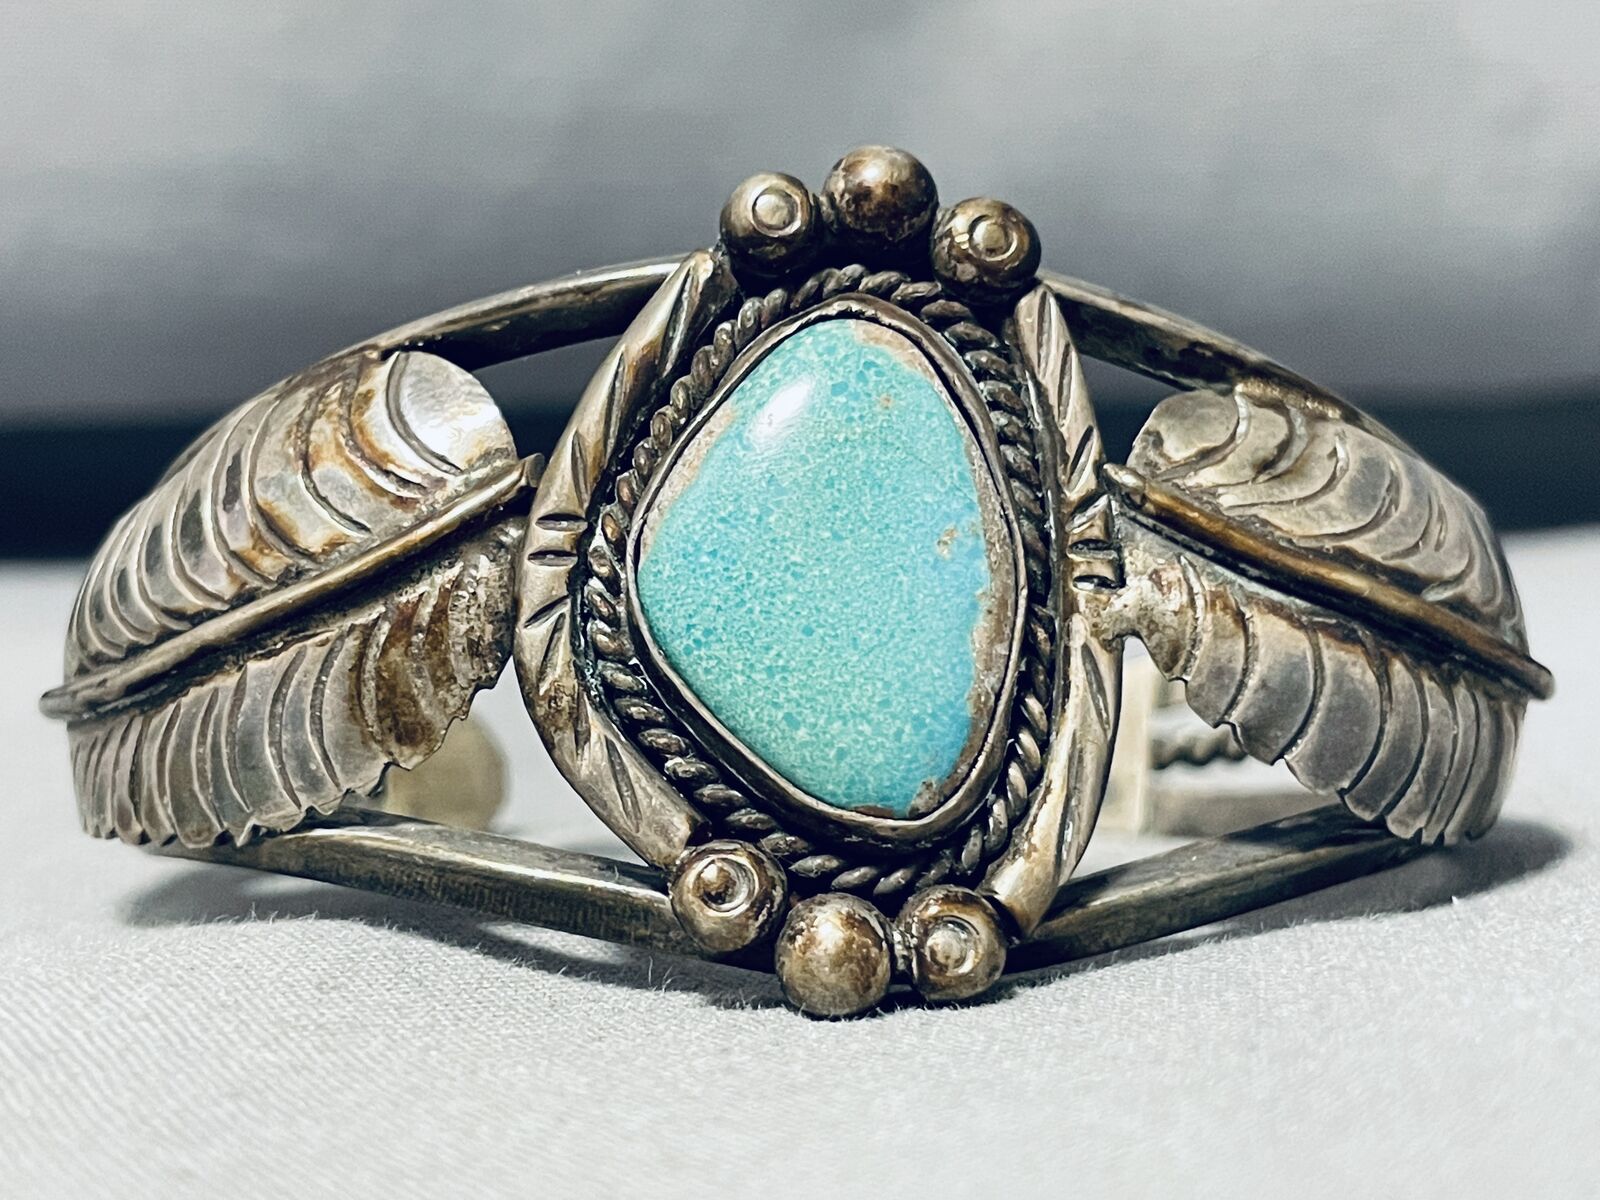 CLASSIC VINTAGE NAVAJO ROYSTON TURQUOISE STERLING SILVER BRACELET